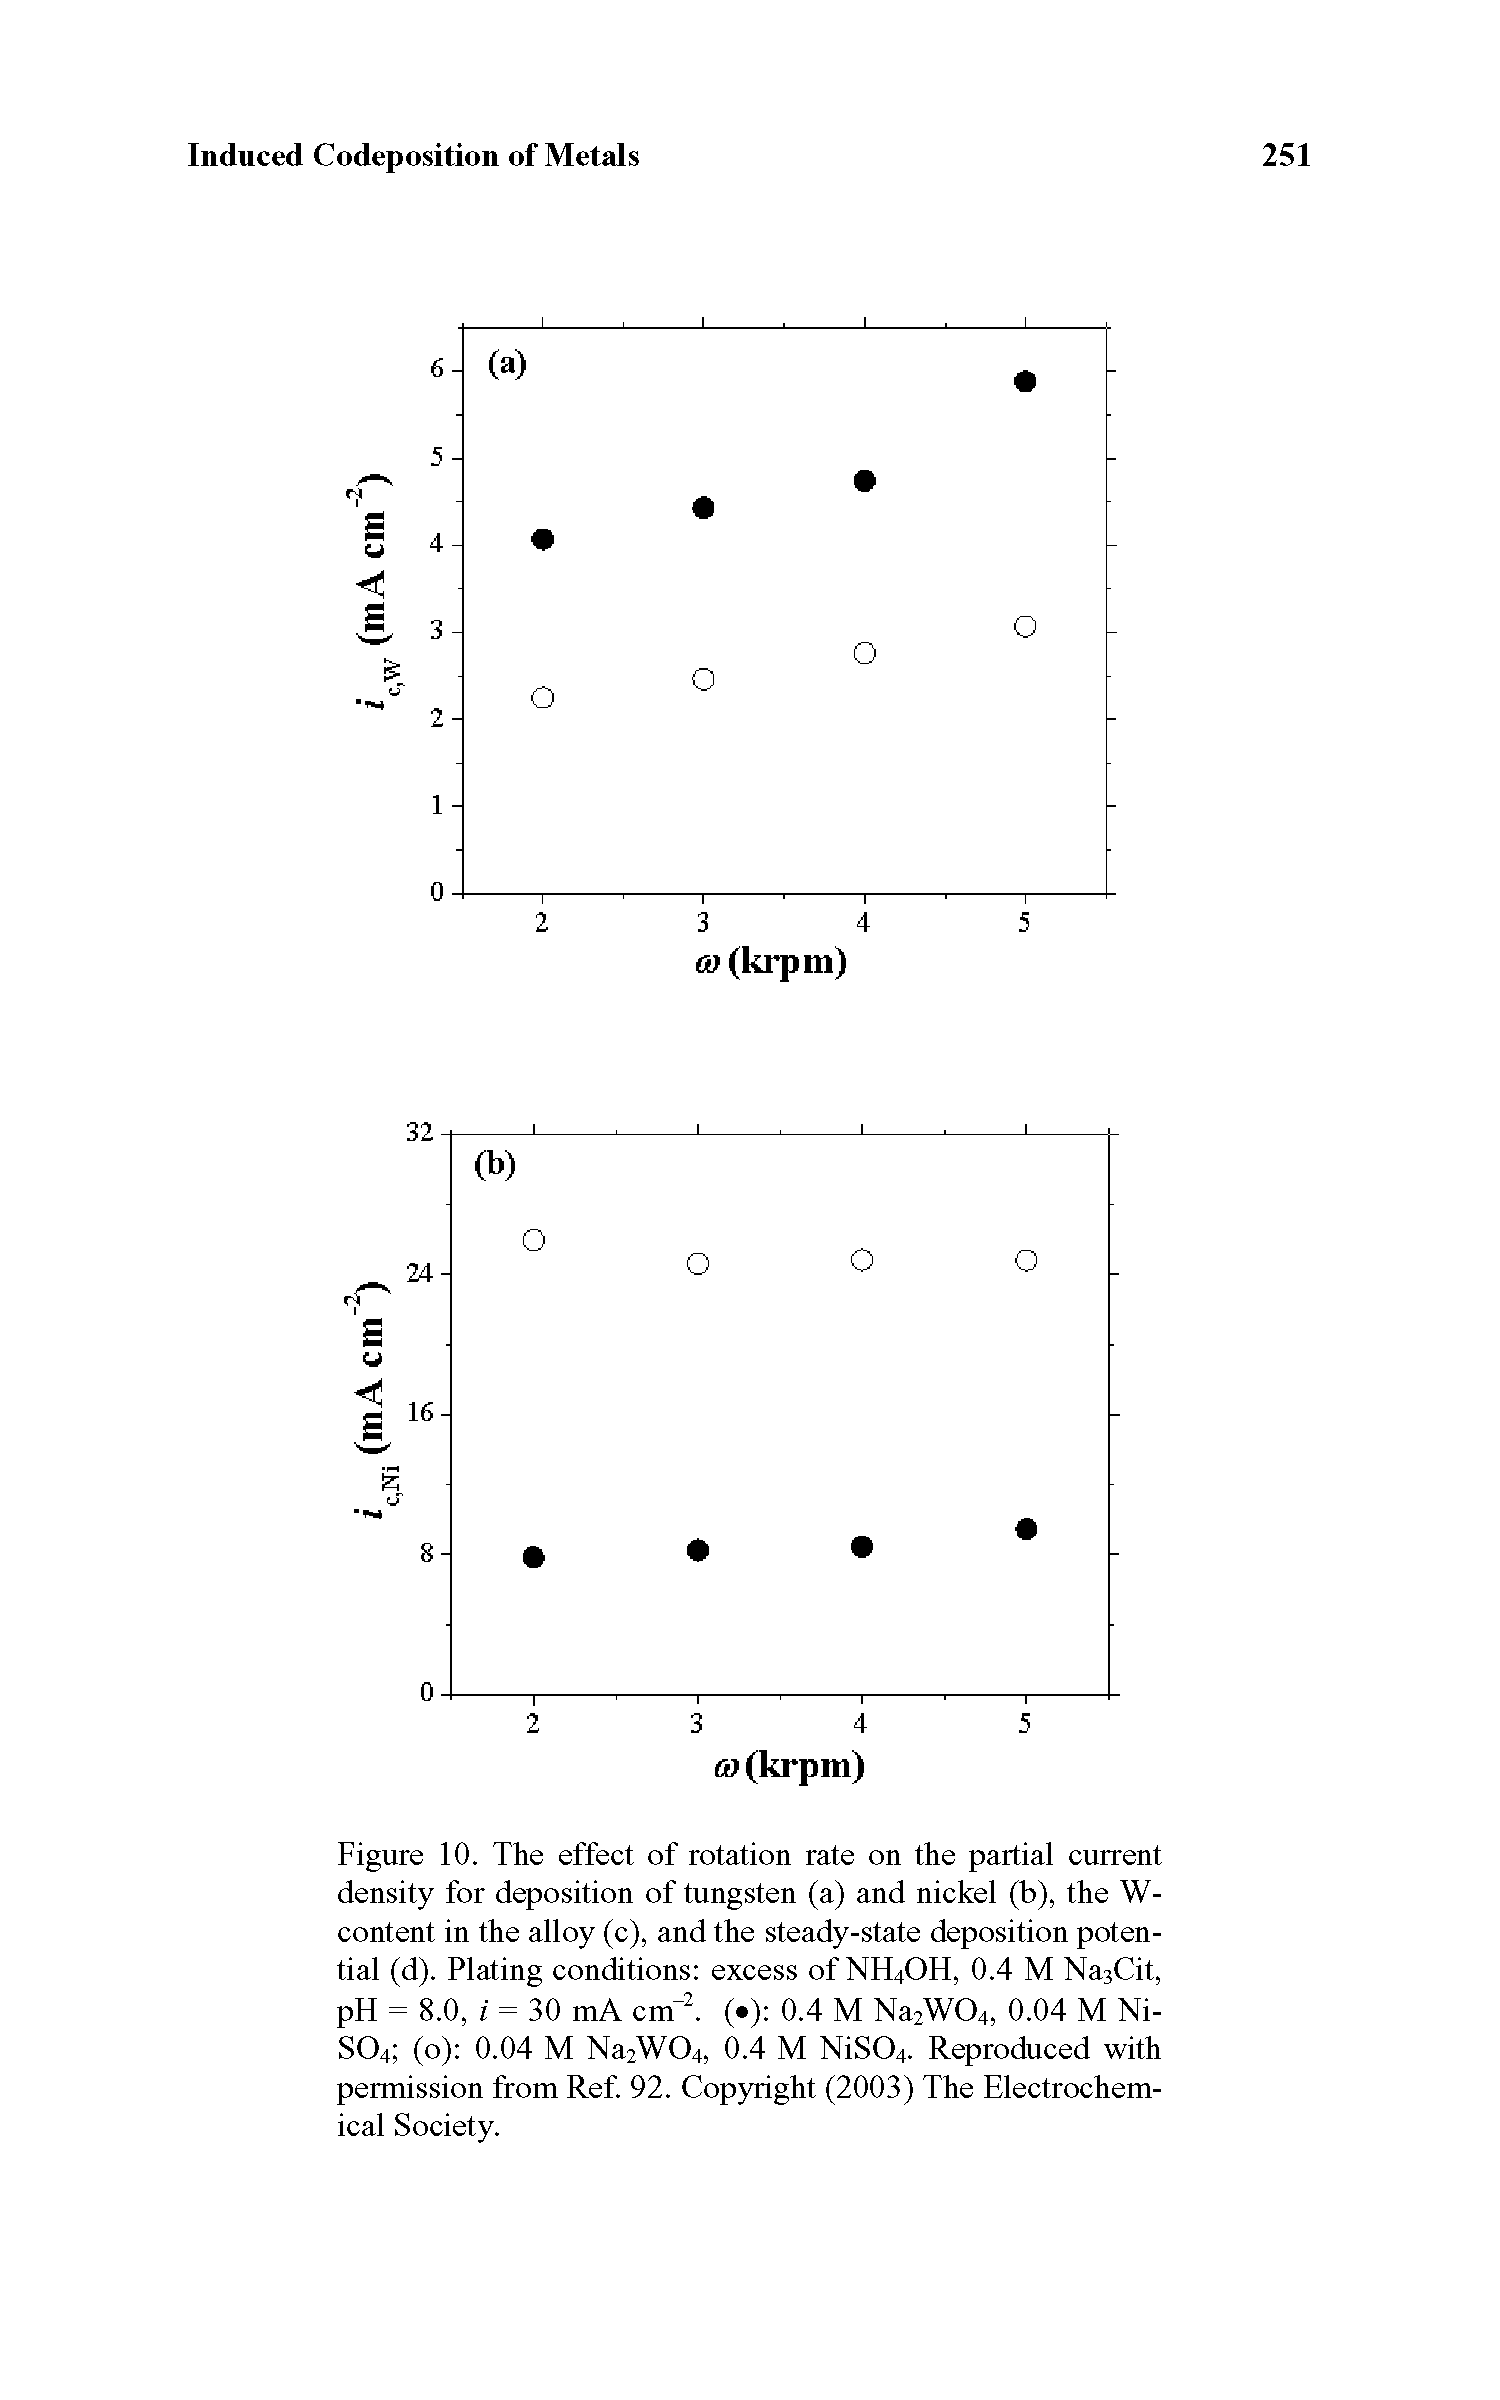 Figure 10. The effect of rotation rate on the partial current density for deposition of tungsten (a) and nickel (b), the W-content in the alloy (c), and the steady-state deposition potential (d). Plating conditions excess of NH4OH, 0,4 M NagCit, pH = 8.0, i = 30 mA cm. (.) 0.4 M u A I),. 0.04 M Ni-SO4 (o) 0.04 M u A I) . 0.4 M NiSO4. Reproduced with permission from Ref, 92, Copyright (2003) The Electrochemical Society.